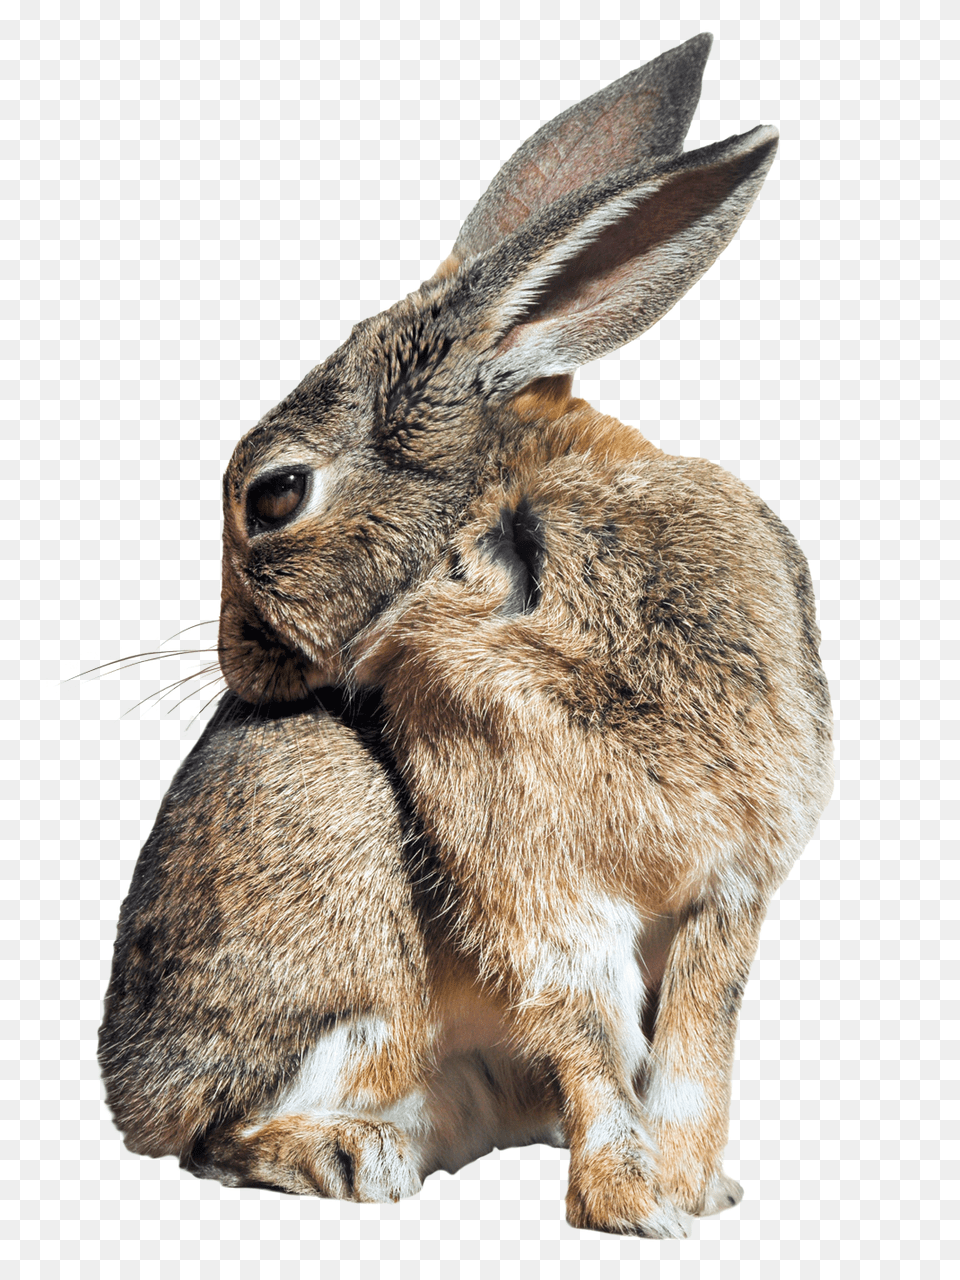 Images Bunny Rabbit Image, Animal, Hare, Mammal, Rodent Png